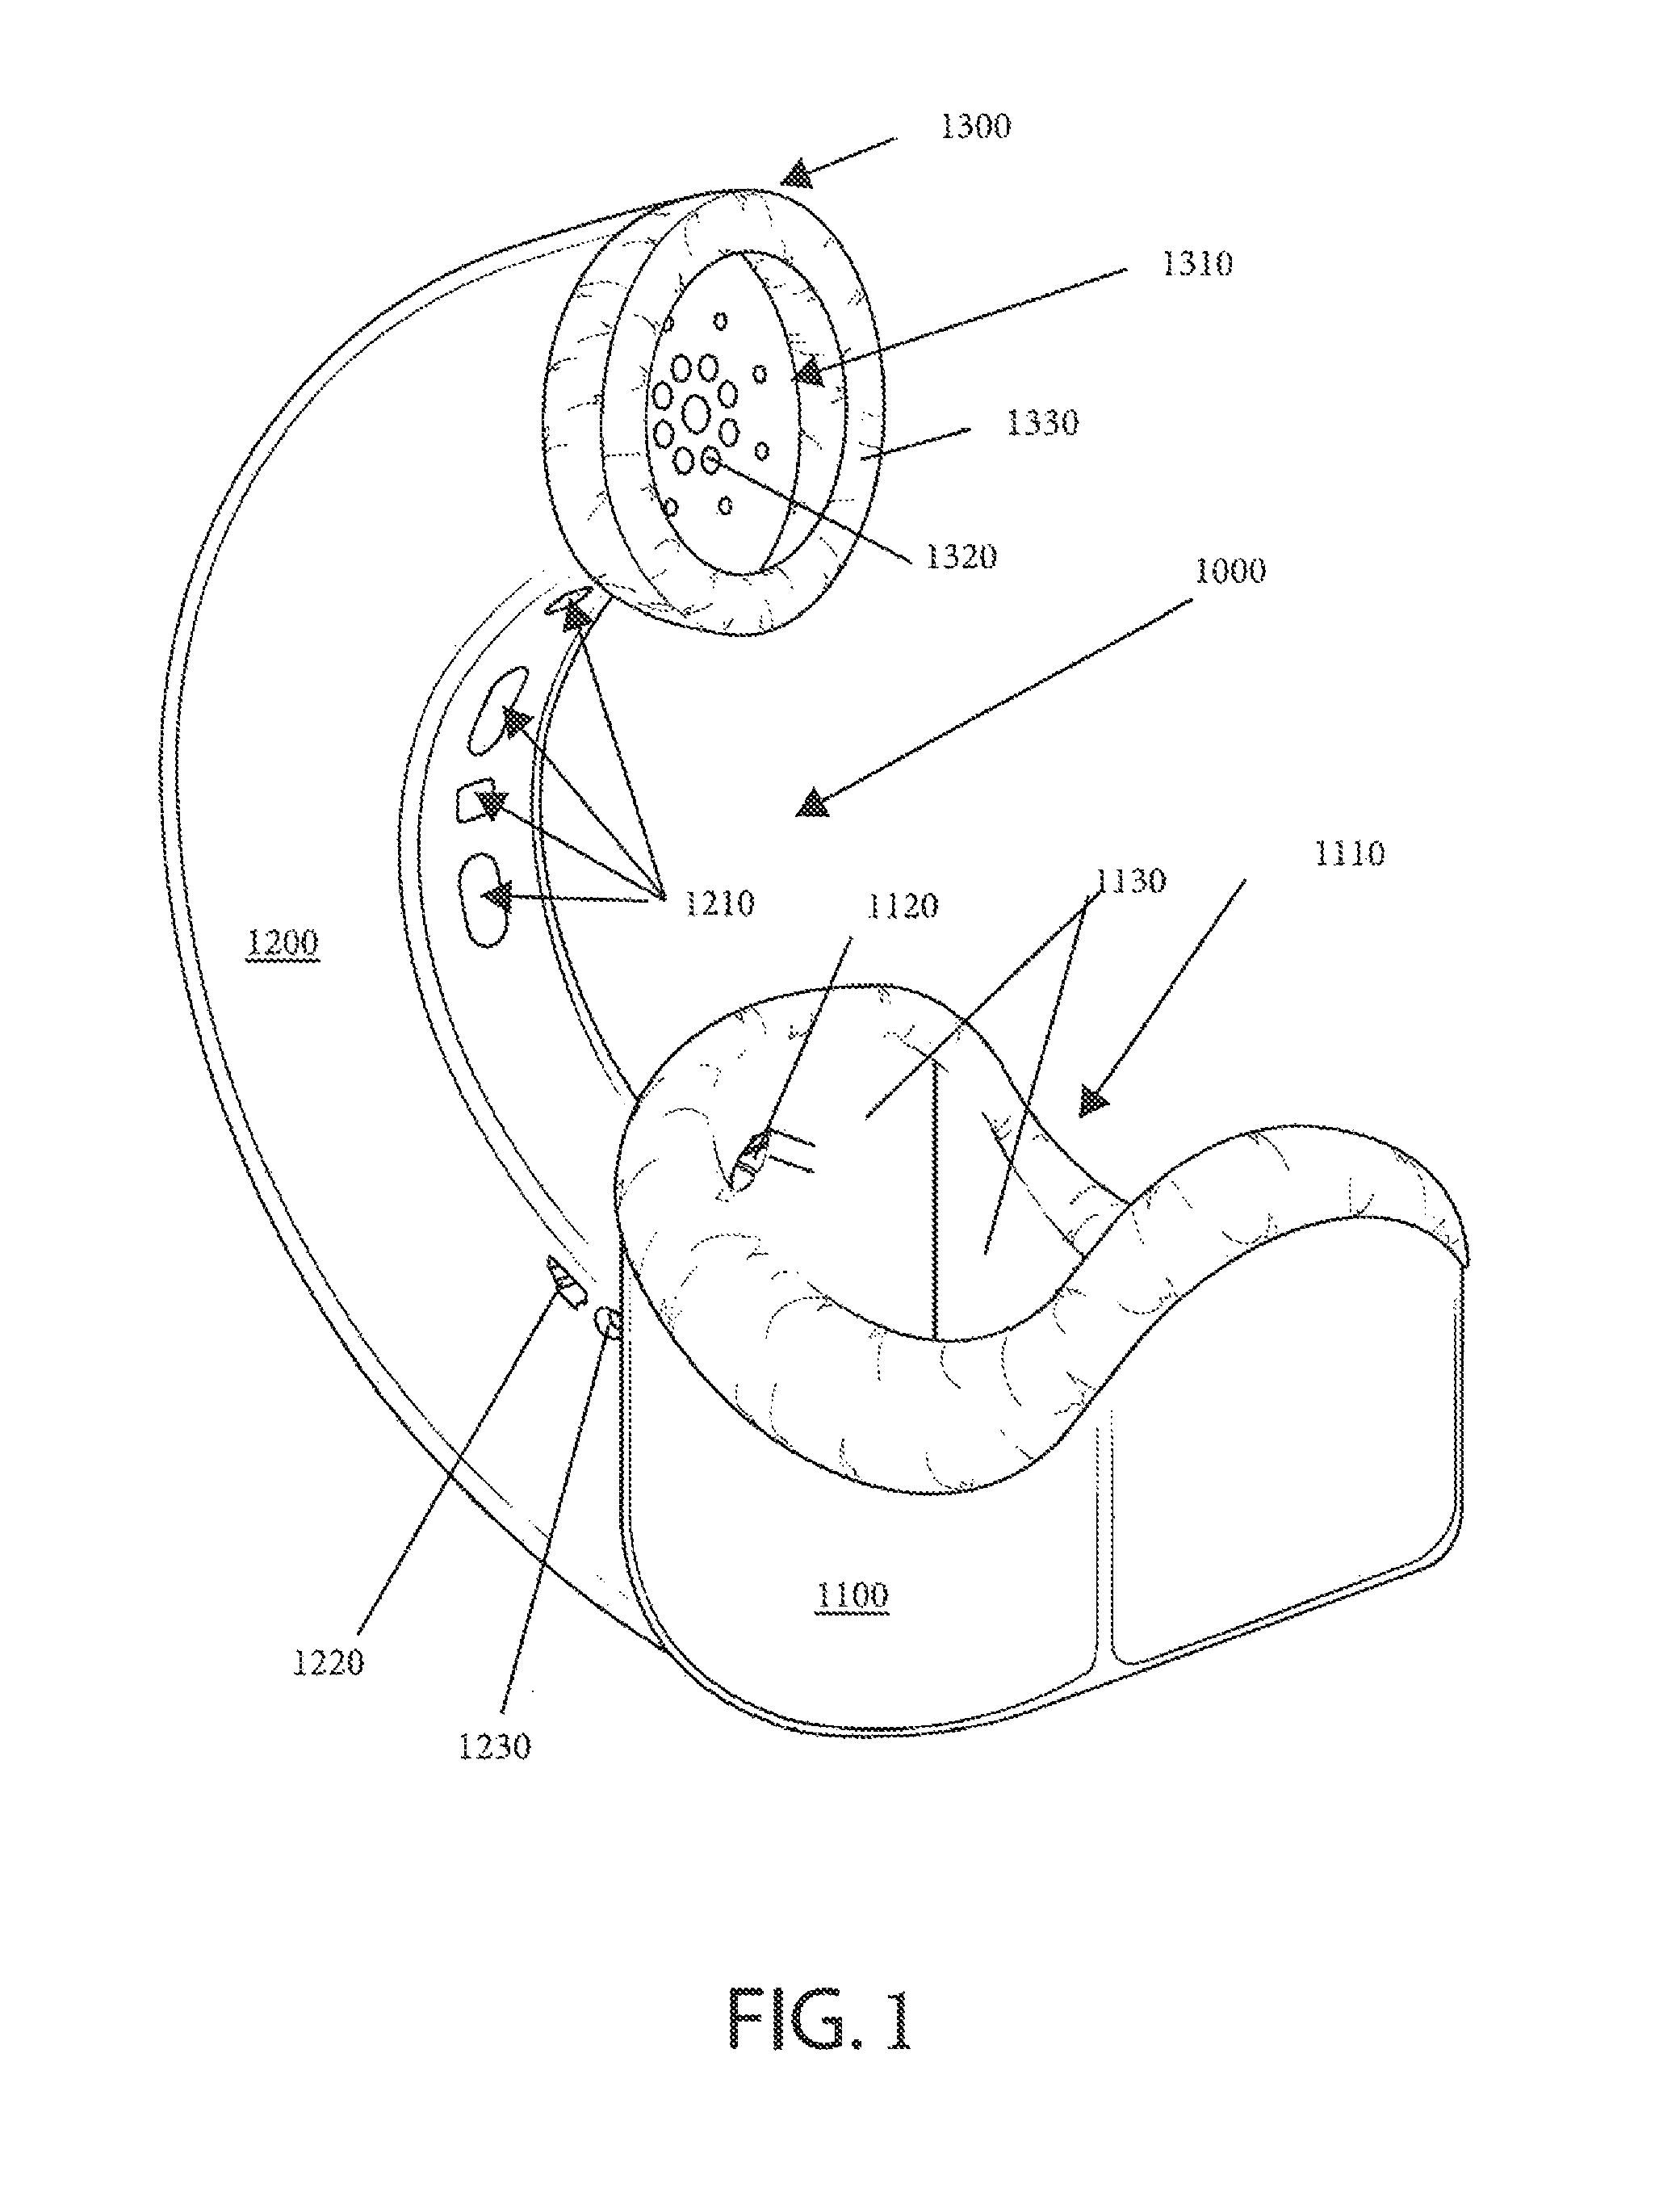 Ergonomic anechoic anti-noise canceling chamber for use with a communication device and related methods